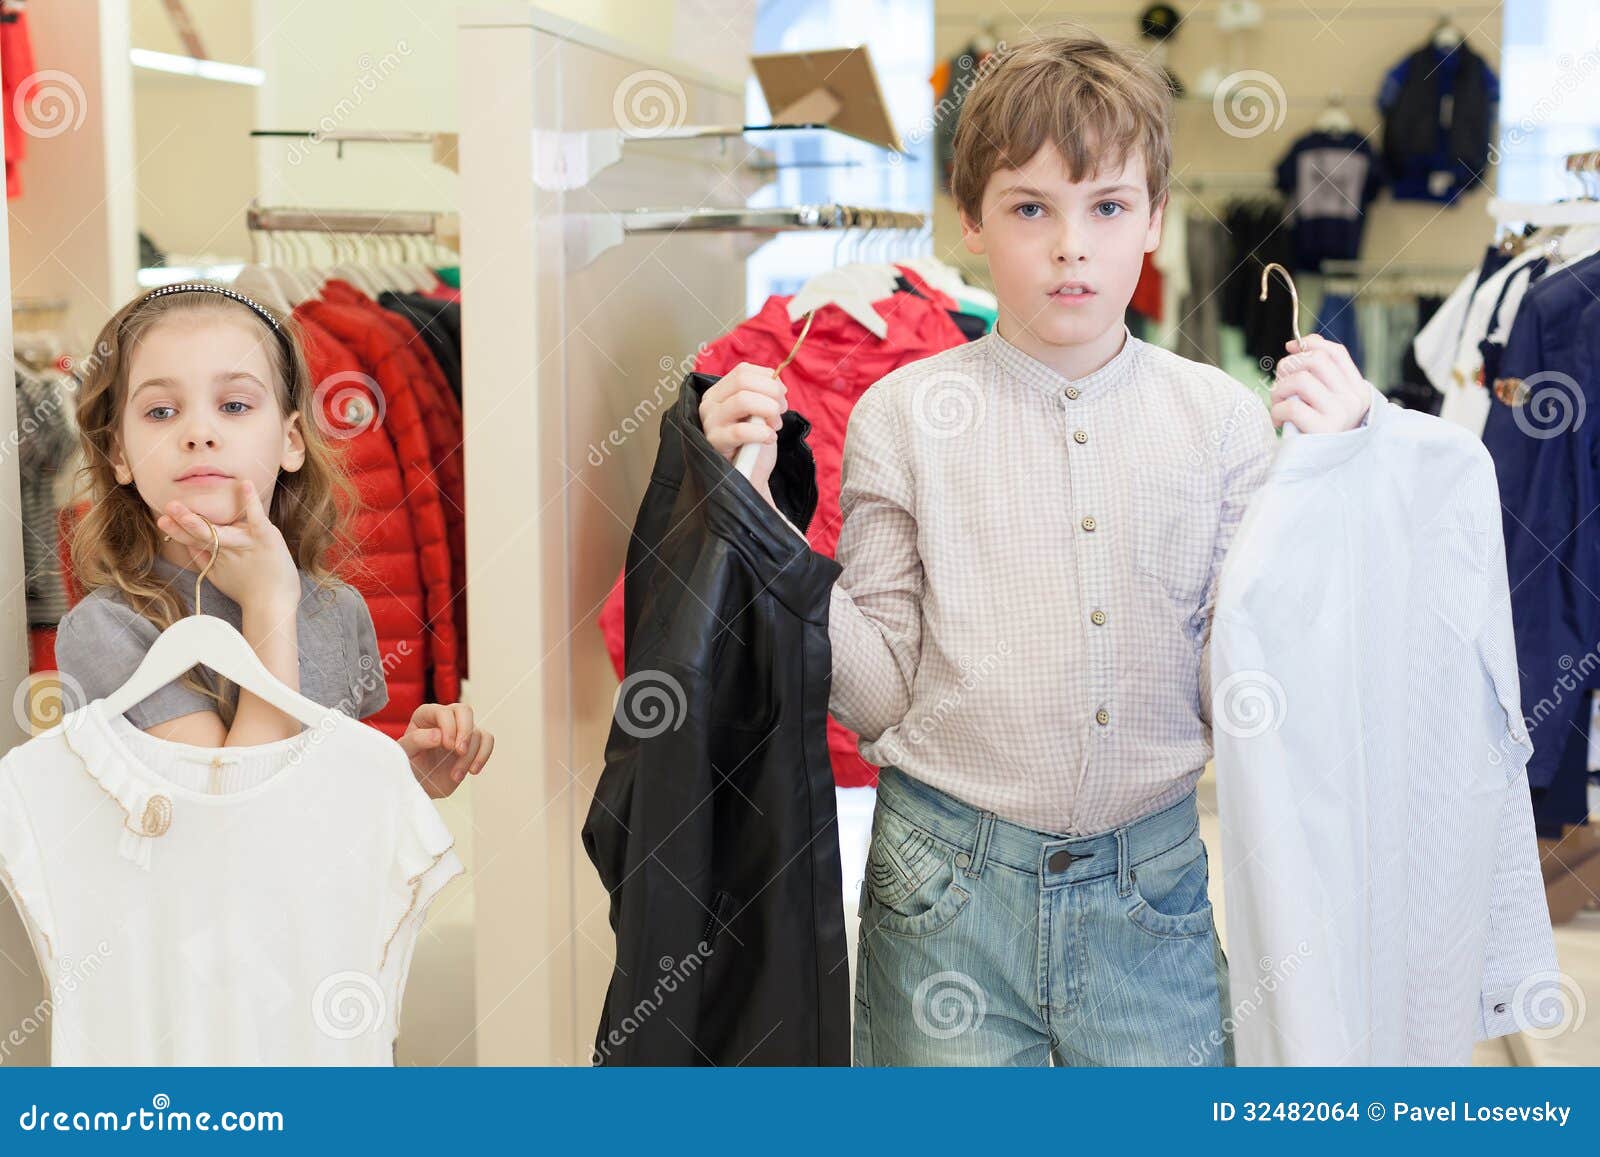 The Boy with the Girl Trying on Clothes Stock Photo - Image of children ...